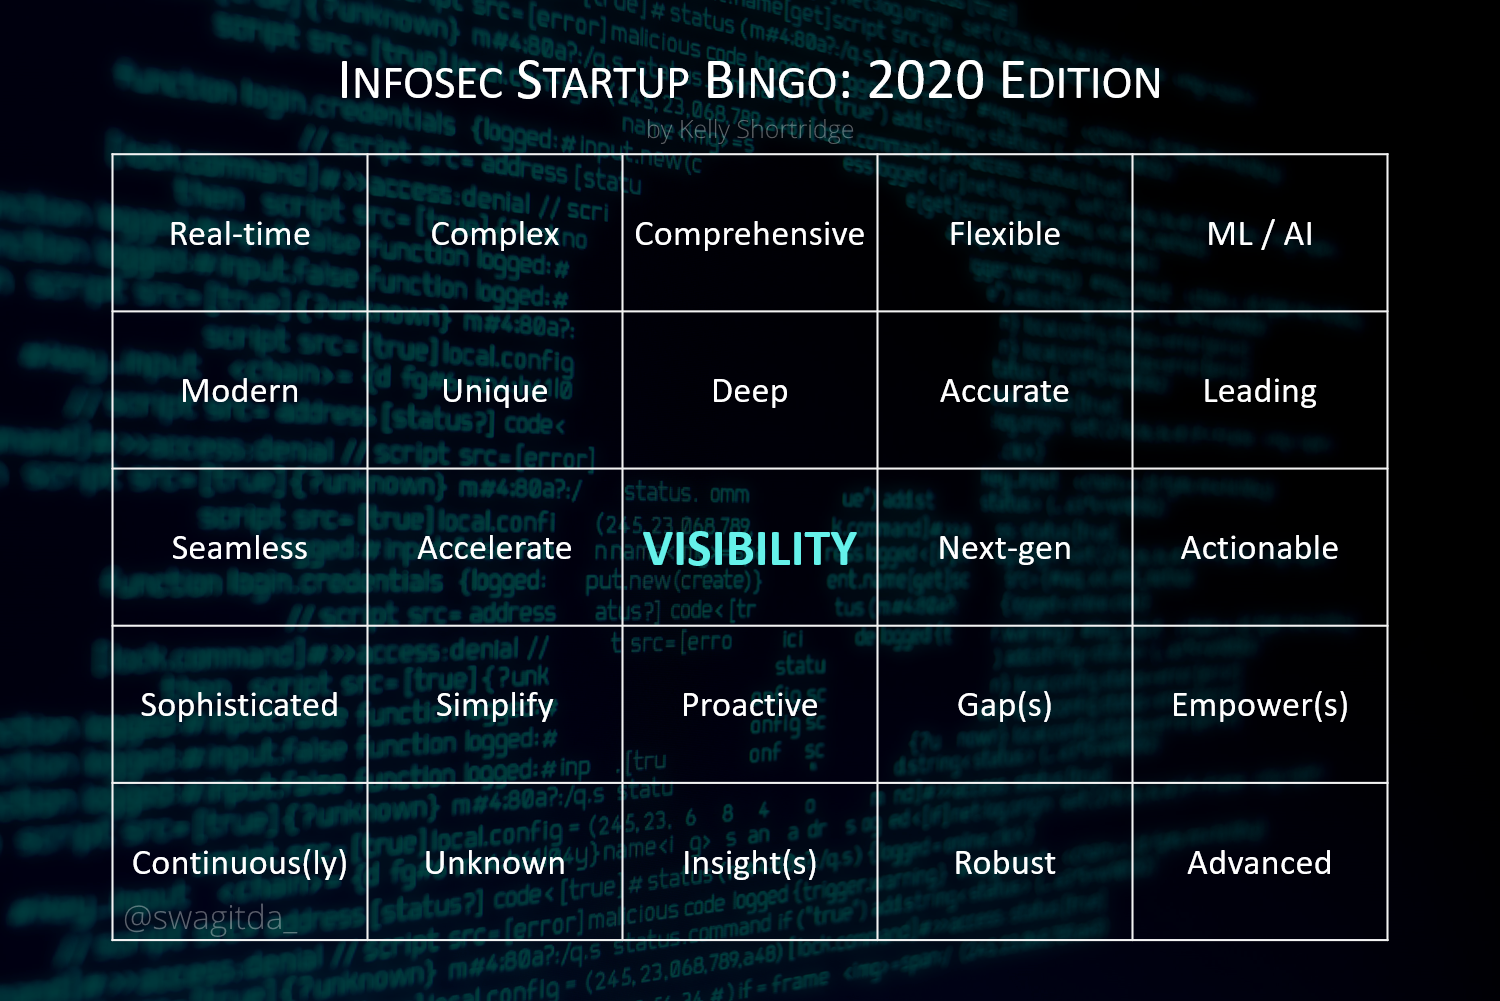 Infosec Startup Buzzword Bingo card for 2020. The buzzwords, from top left to bottom right include: Real-time. Complex. Comprehensive. Flexible. Machine Learning and AI. Modern. Unique. Deep. Accurate. Leading. Seamless. Accelerate. Visibility (the center square). Next-gen. Actionable. Sophisticated. Simplify. Proactive. Gaps. Empower. Continuous. Unknown. Insights. Robust. Advanced